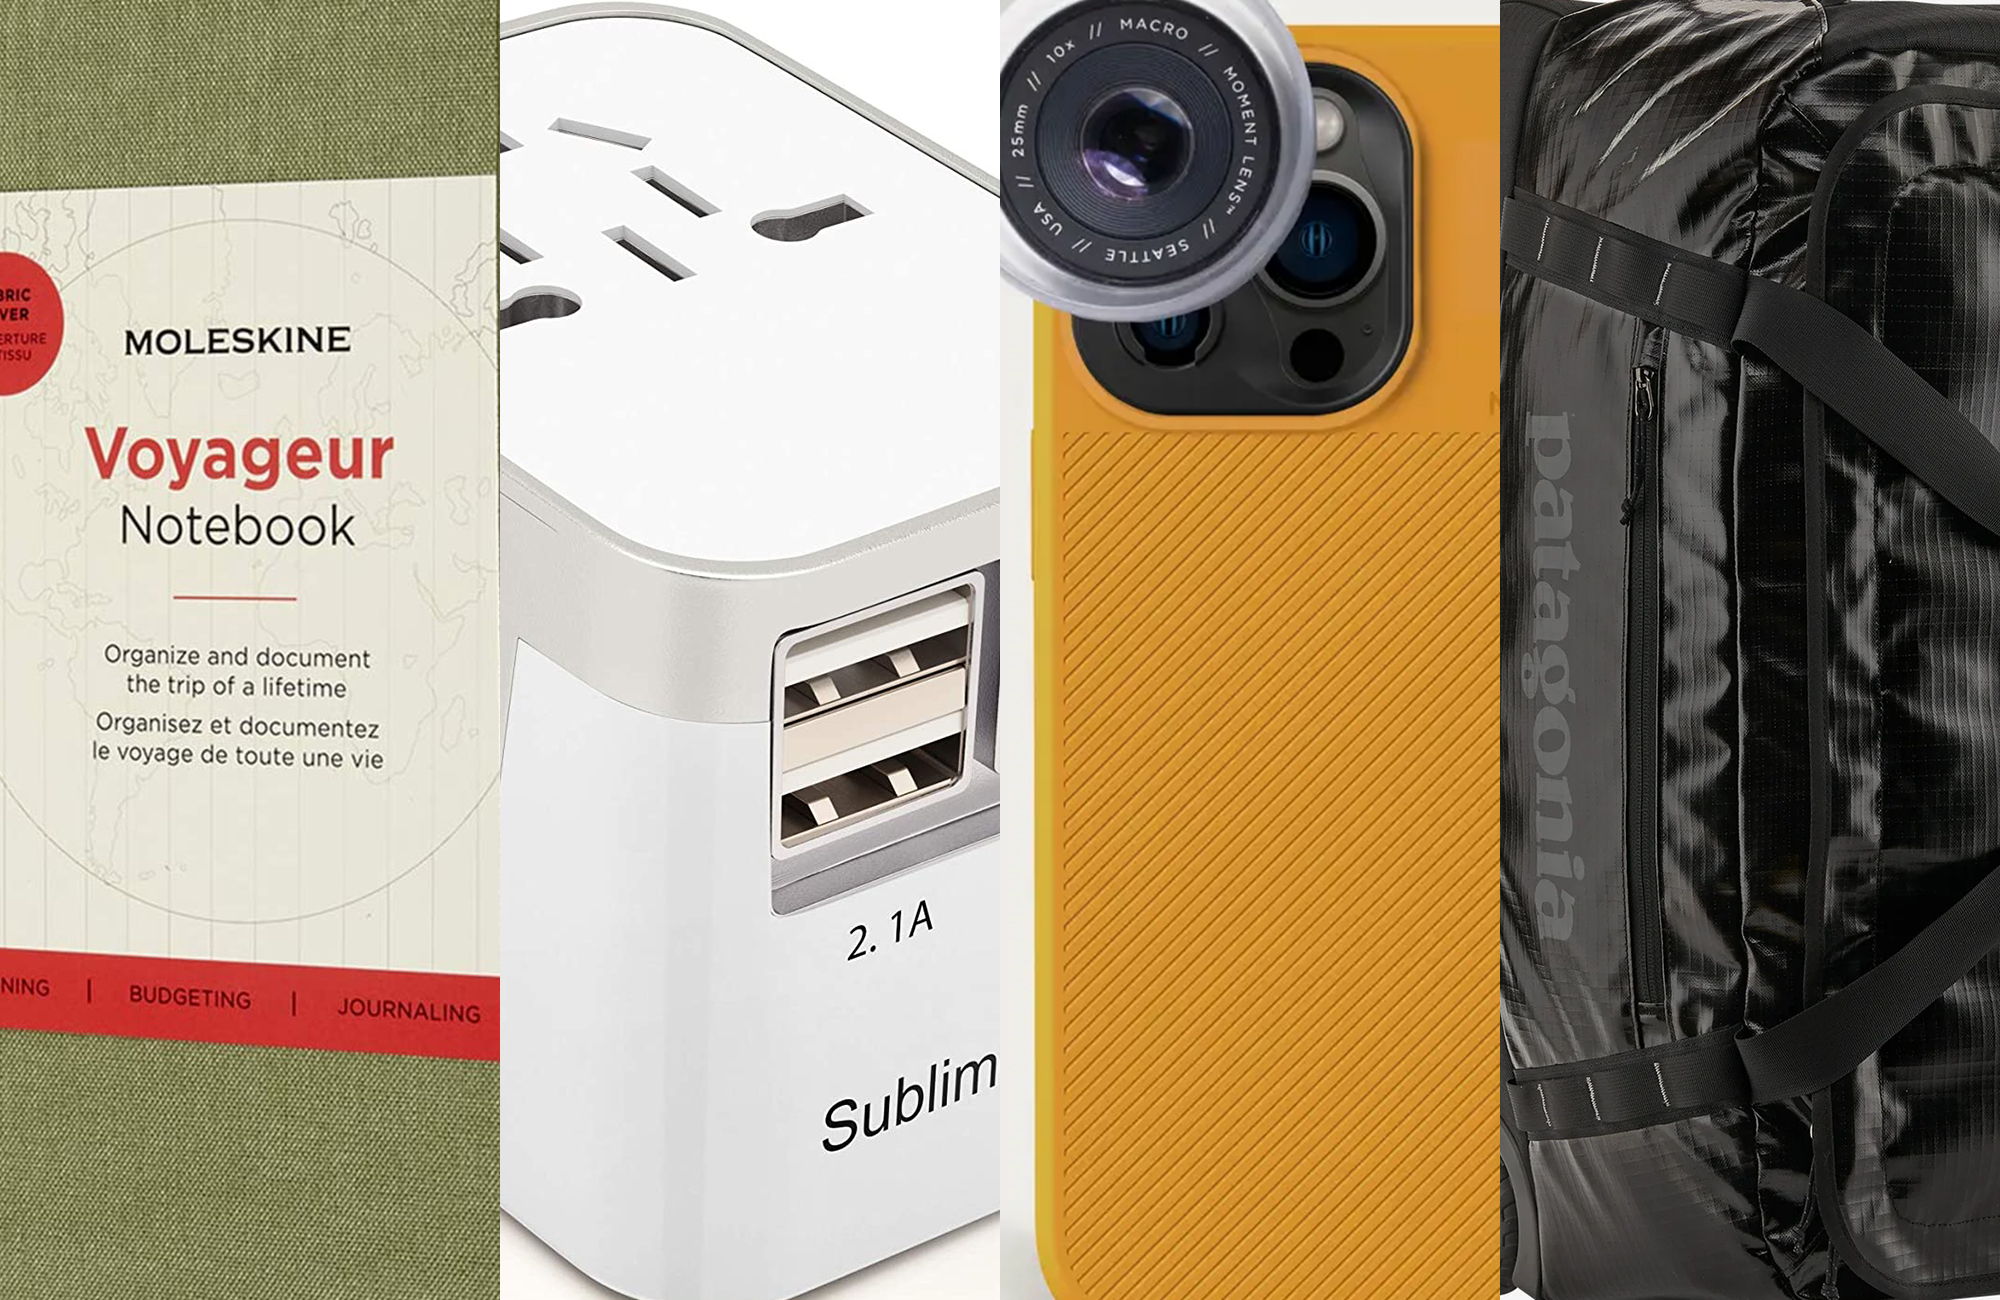 Gifts for photographers: The best gift ideas for photo enthusiasts